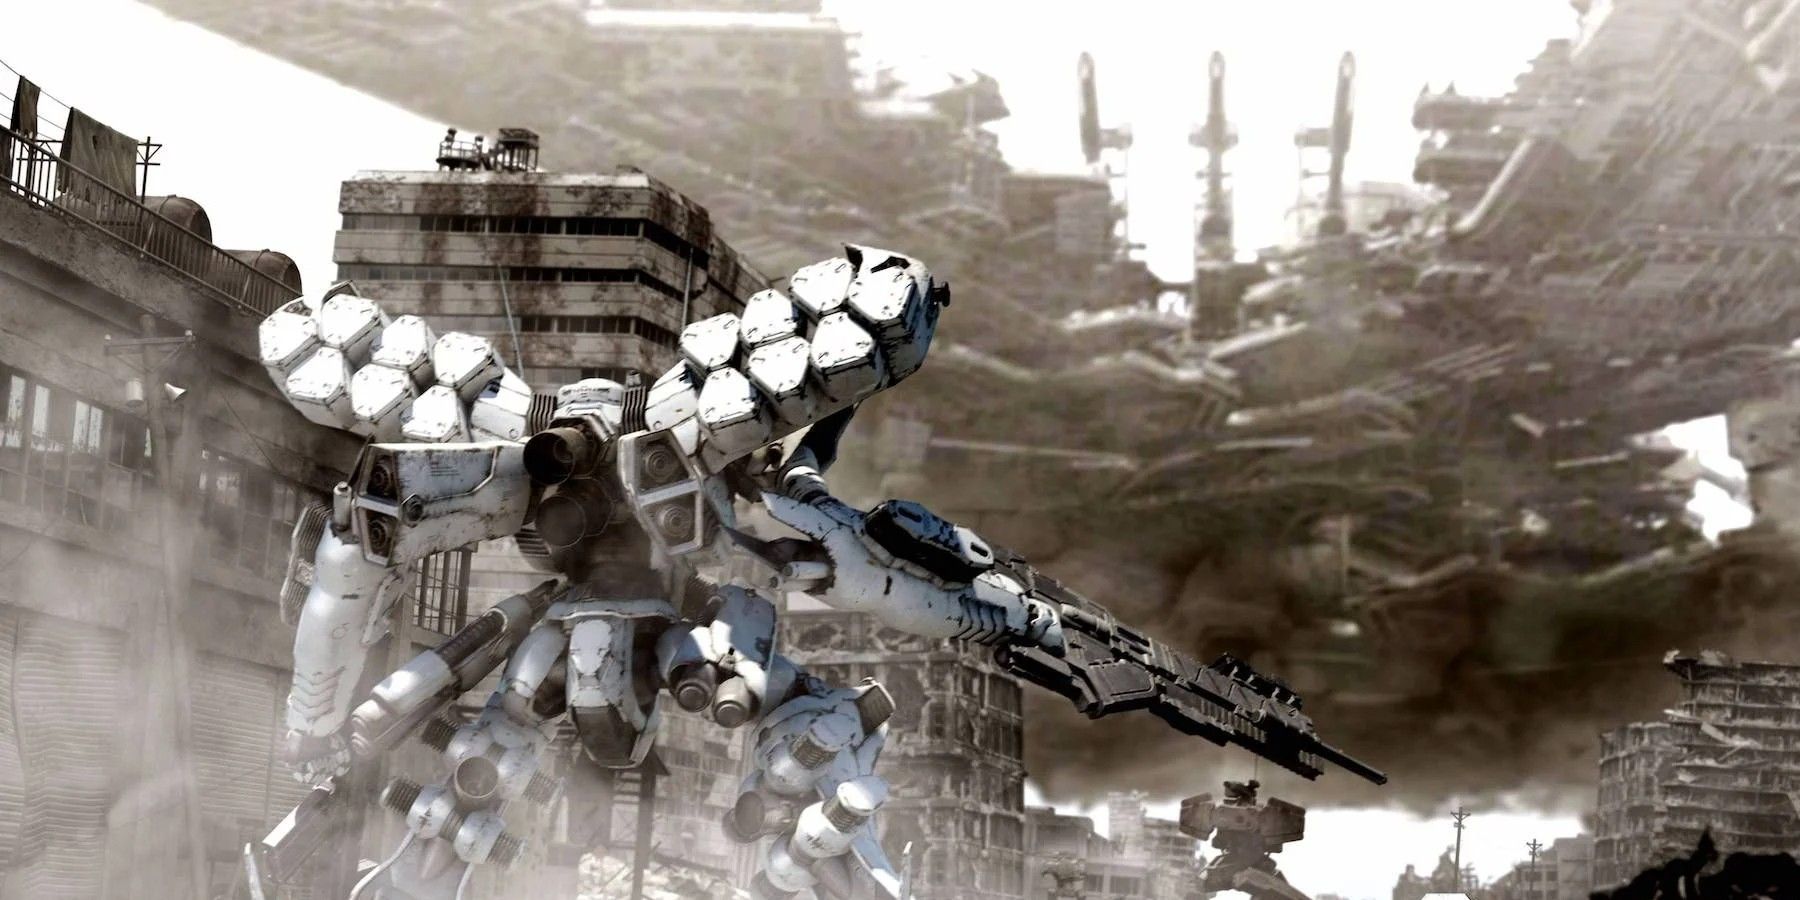 It appears that FromSoftware's next project is a new Armored Core